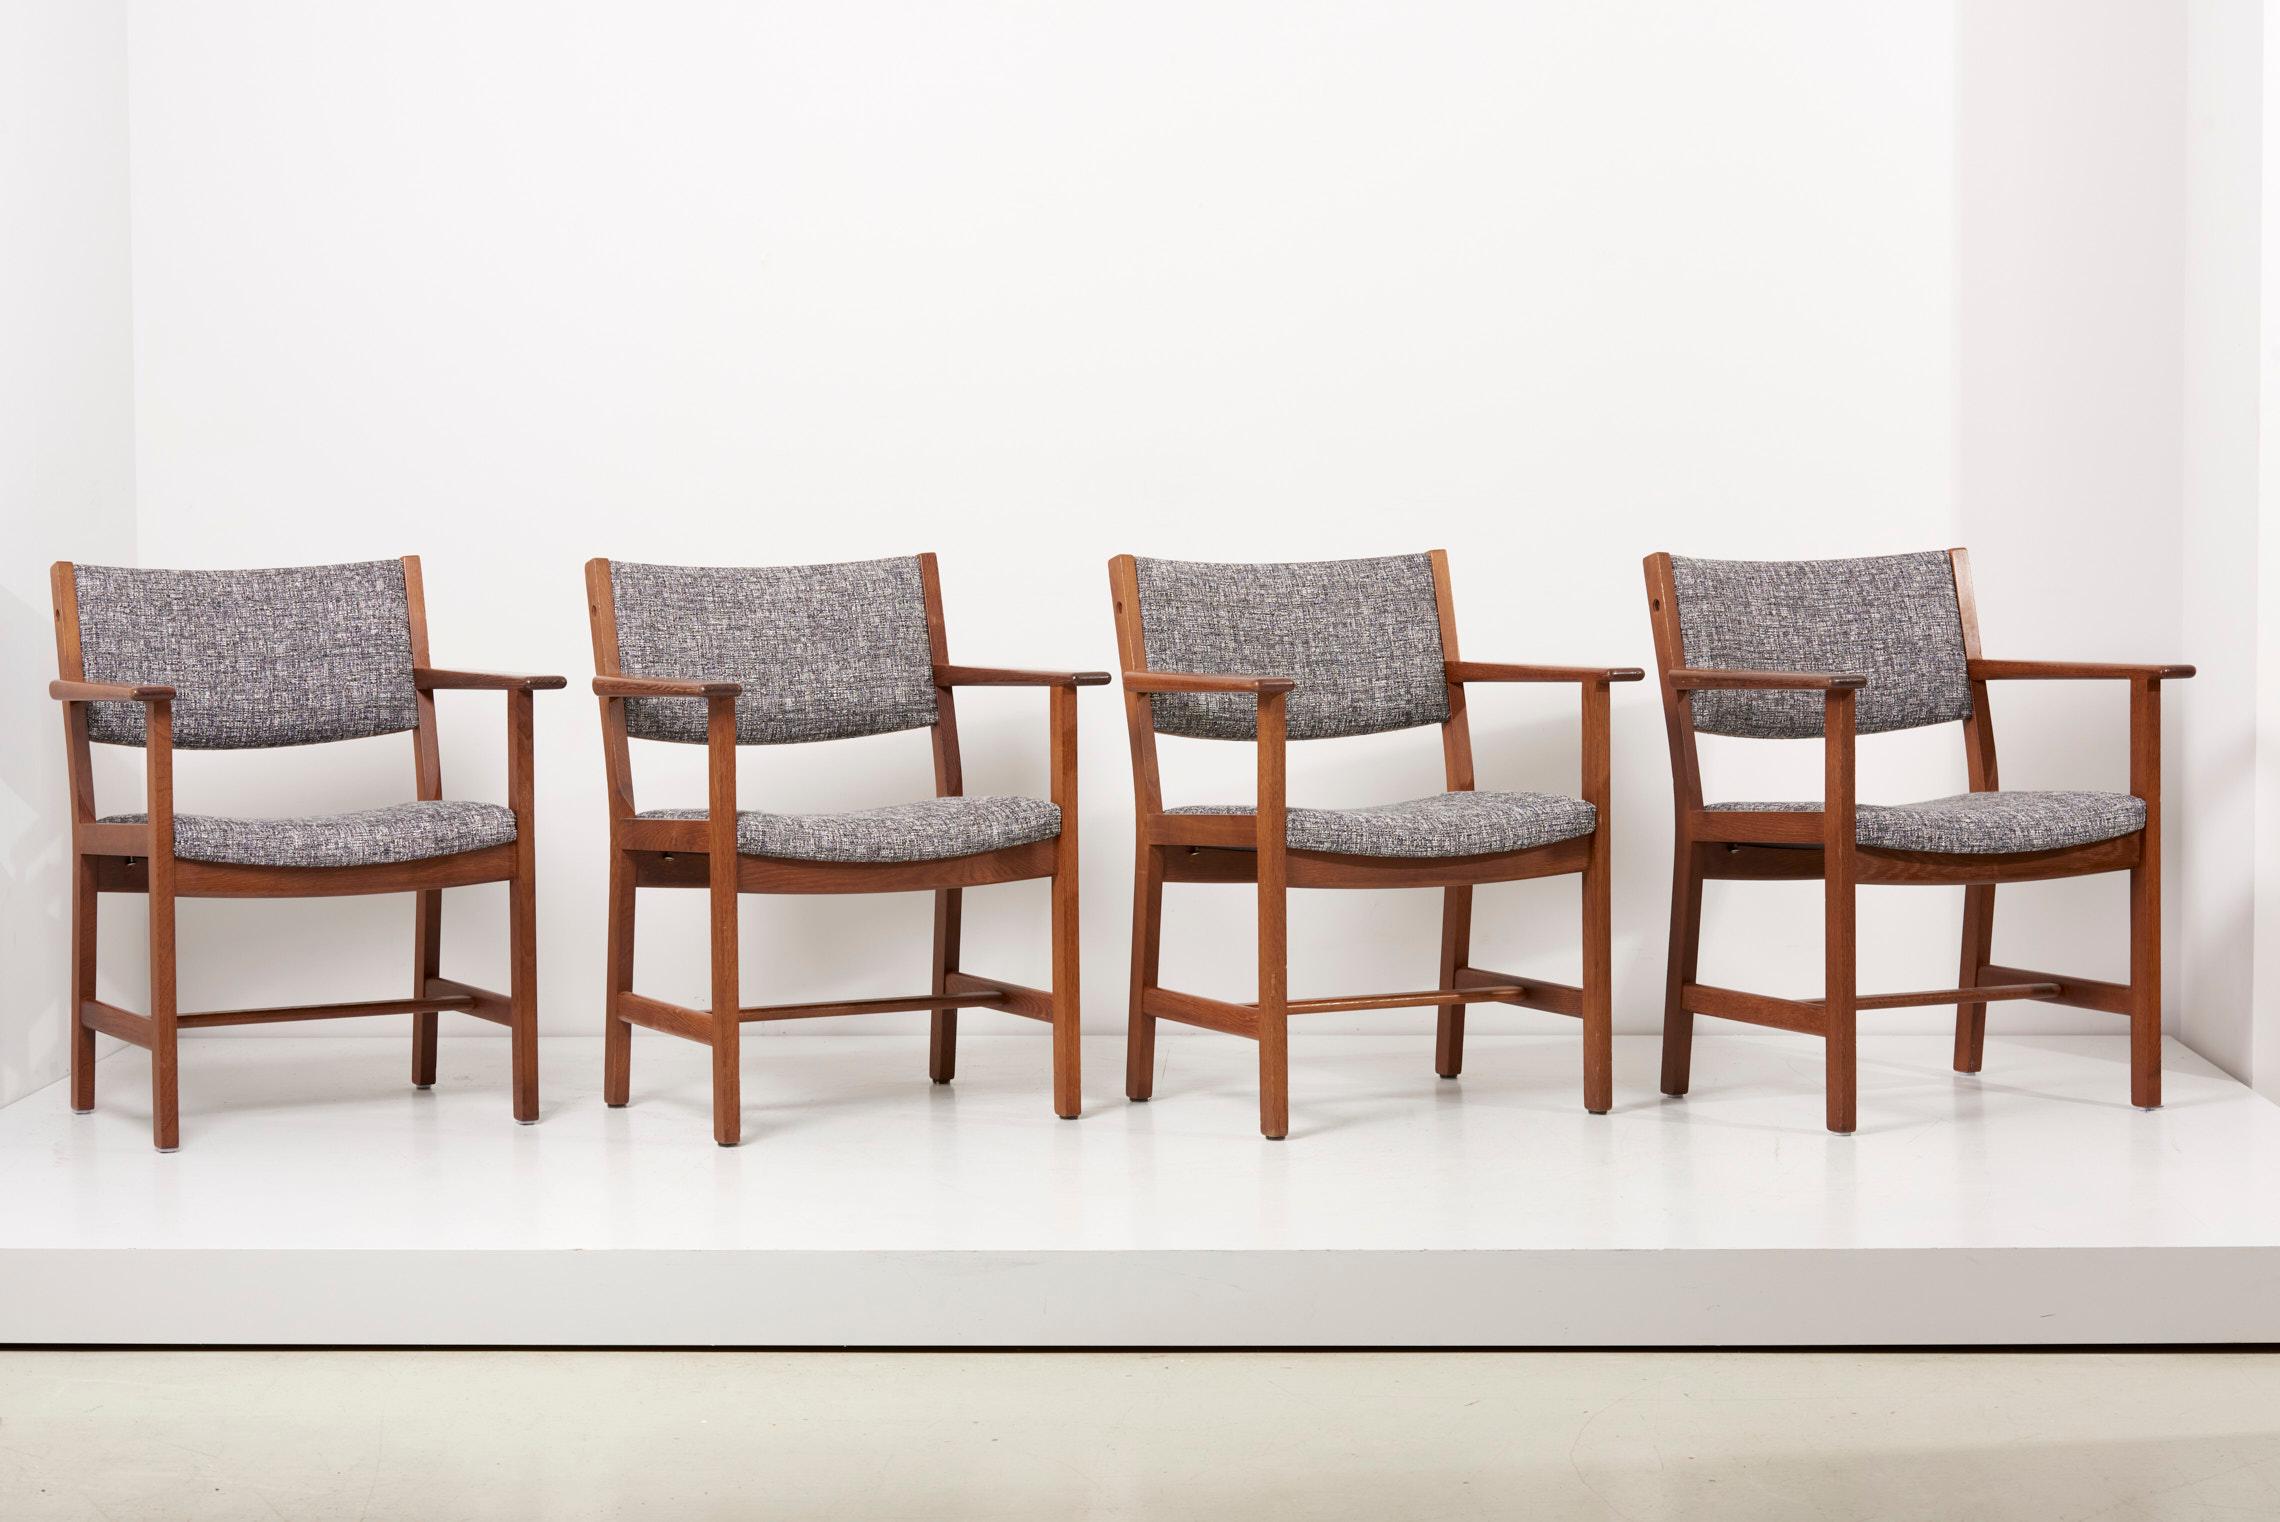 Set of 8 Hans Wegner GE dining chairs for GETAMA, Denmark 1950s
This set is newly upholstered in Raf Simons fabric by Kvadrat.